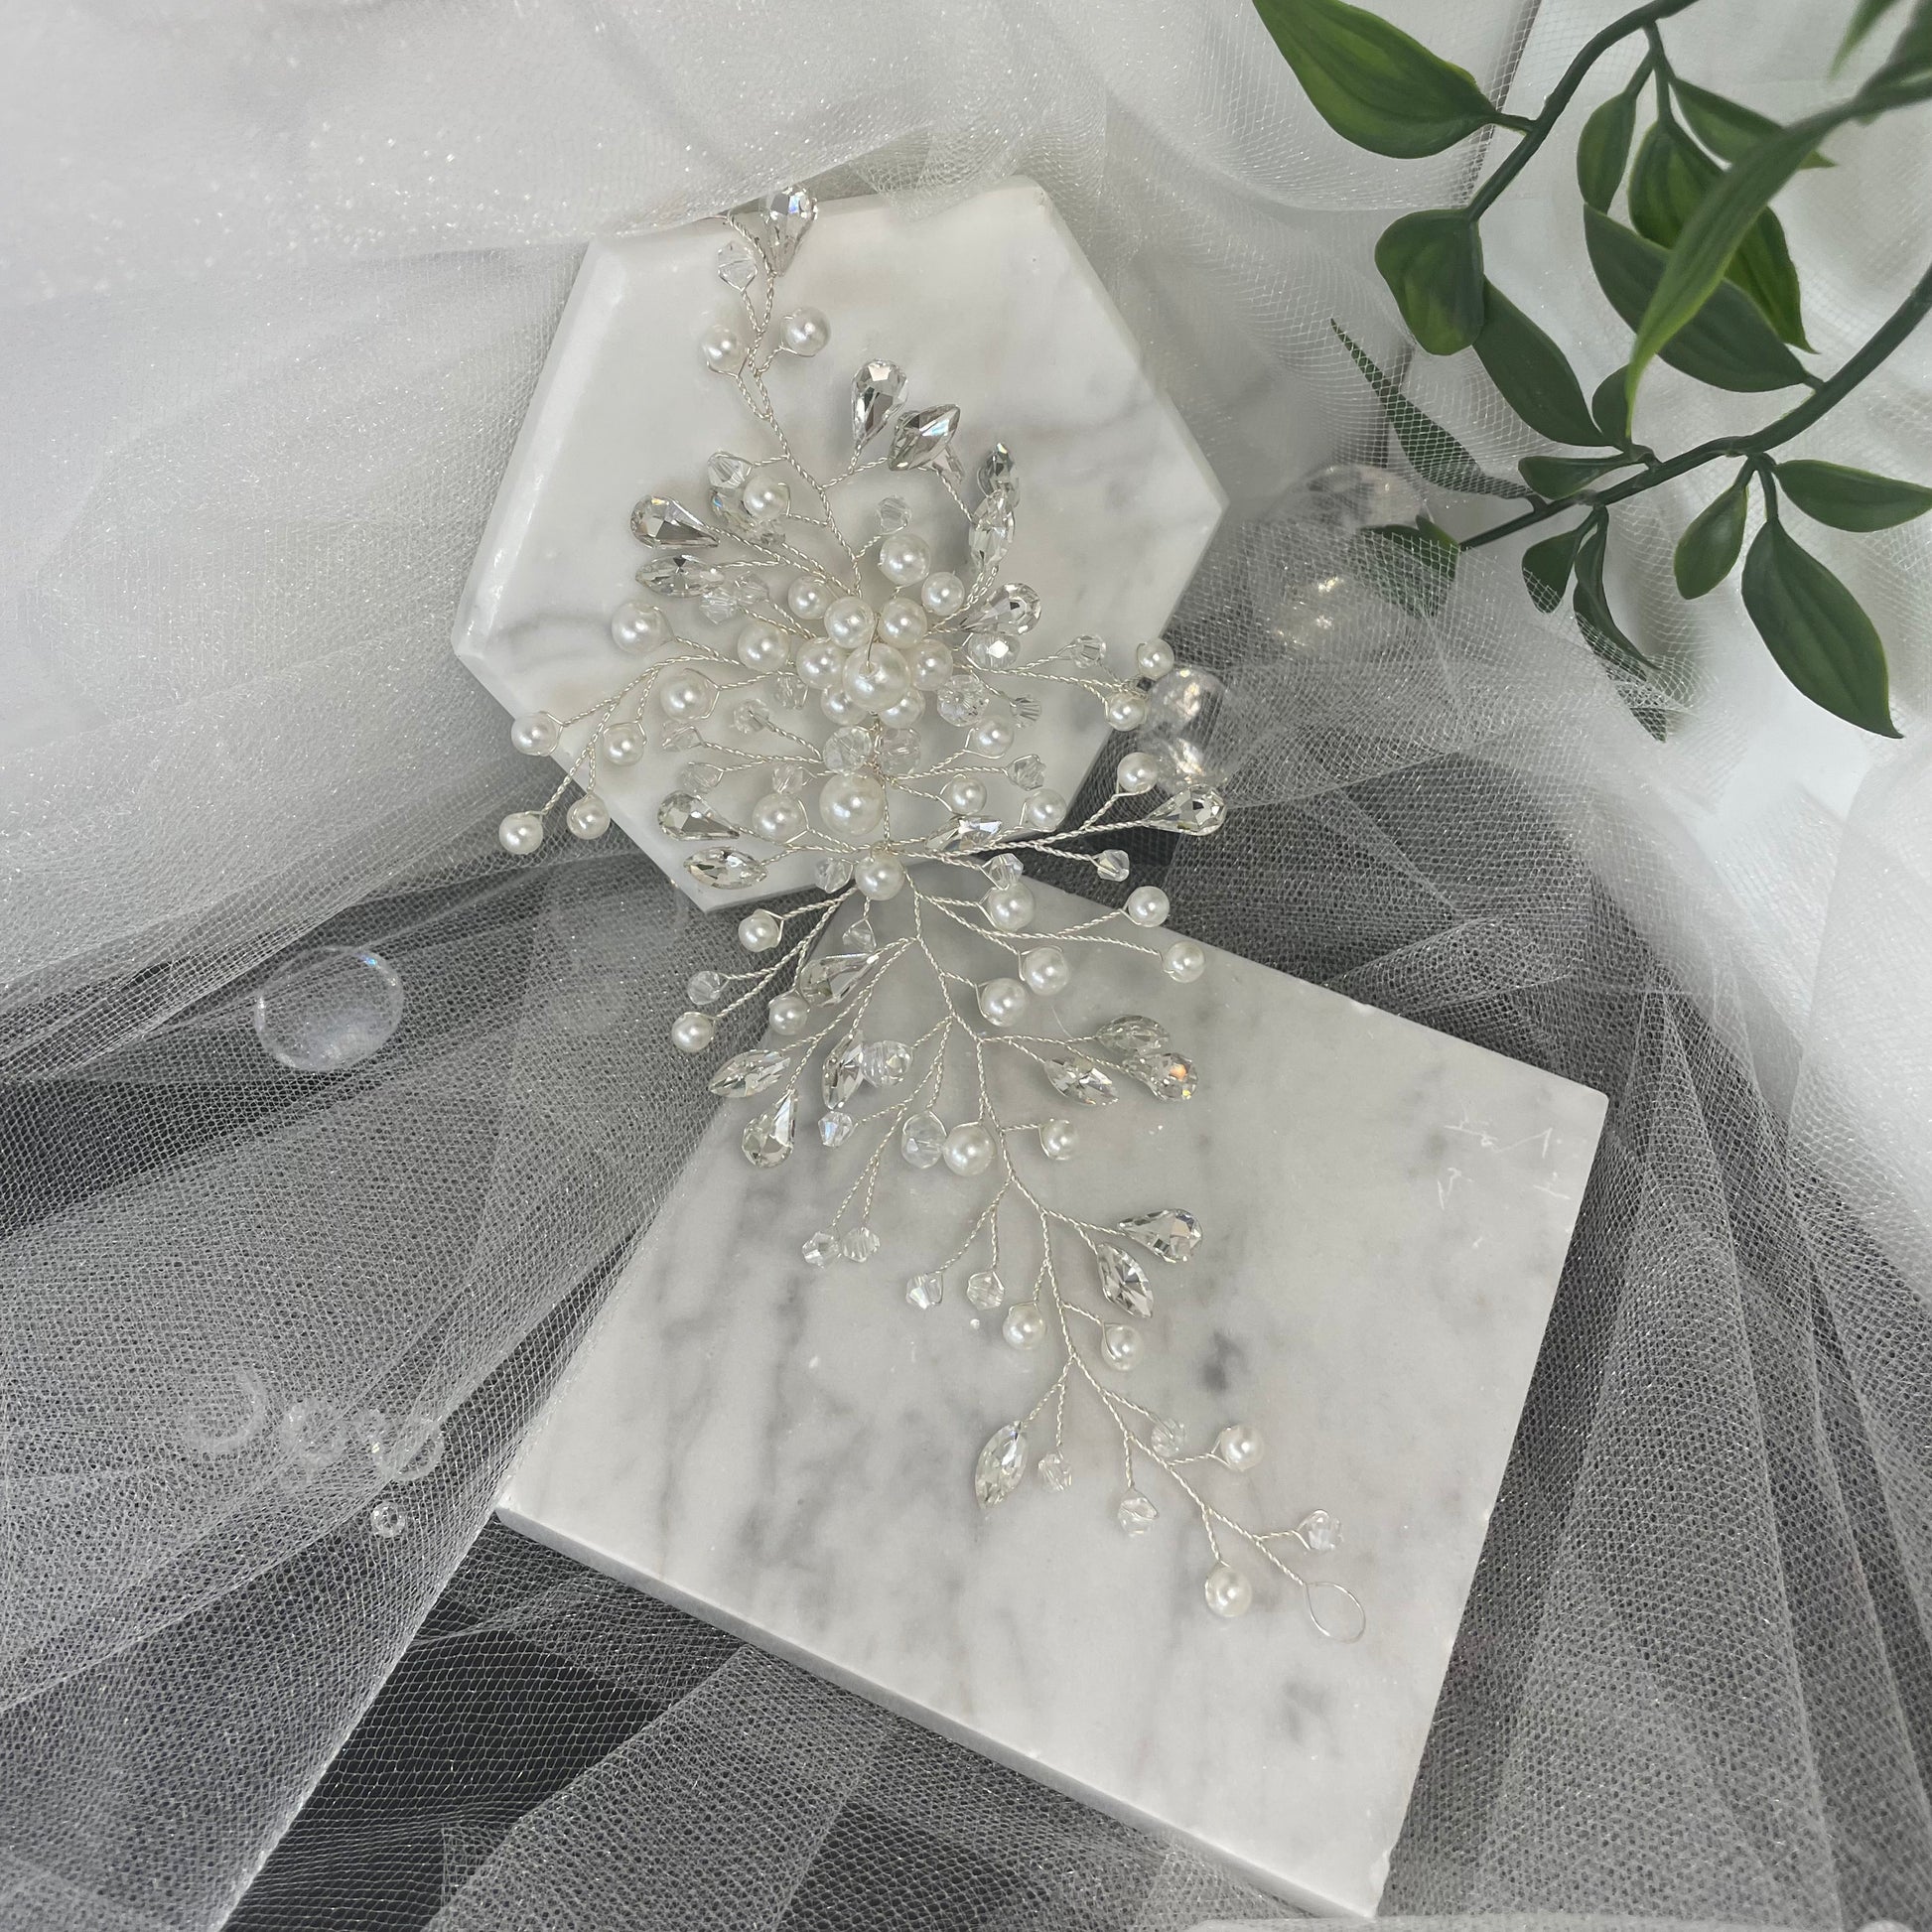 Elegant Cora Bridal Hair Vine featuring sparkling Diamantés, crystals, and pearls on a silver wire, designed to add a glamorous and radiant shine to bridal hairstyles.